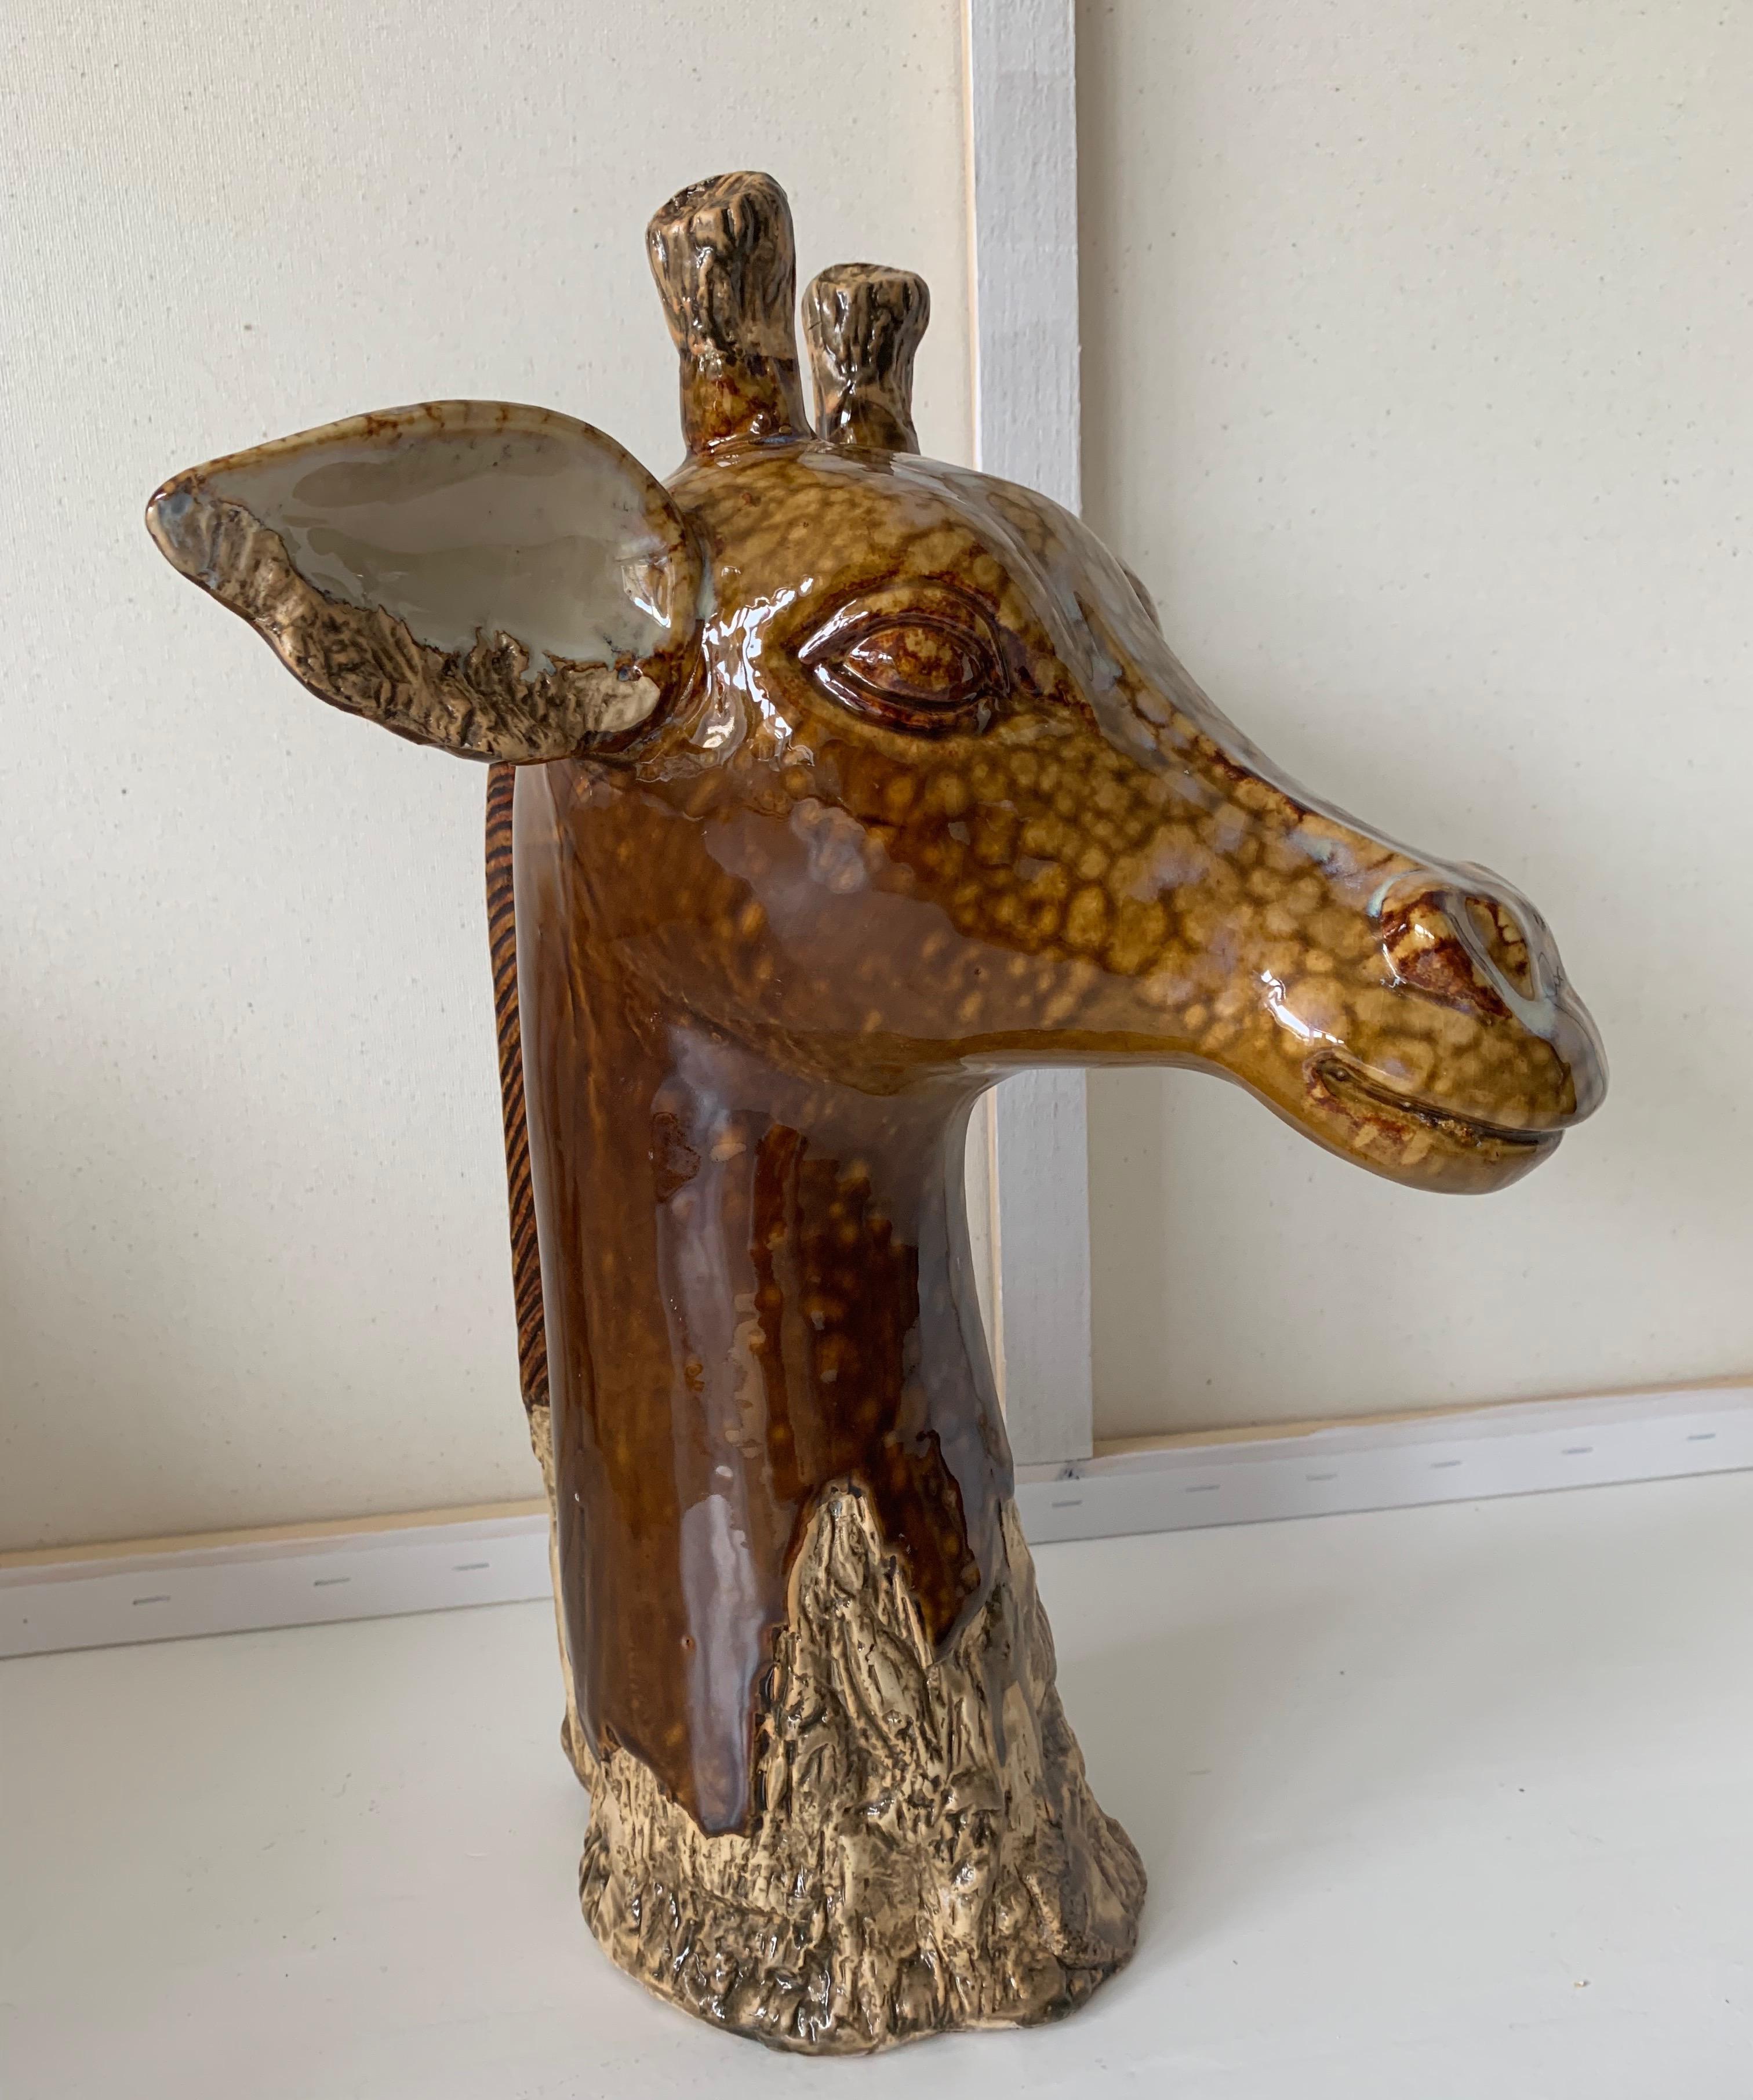 Rare and highly decorative giraffe sculpture.

Anyone who has ever been to Africa and saw these majestic animals in the wild will never forget the sight of them. The graceful manner in which these giants of the savannah move and their beautiful